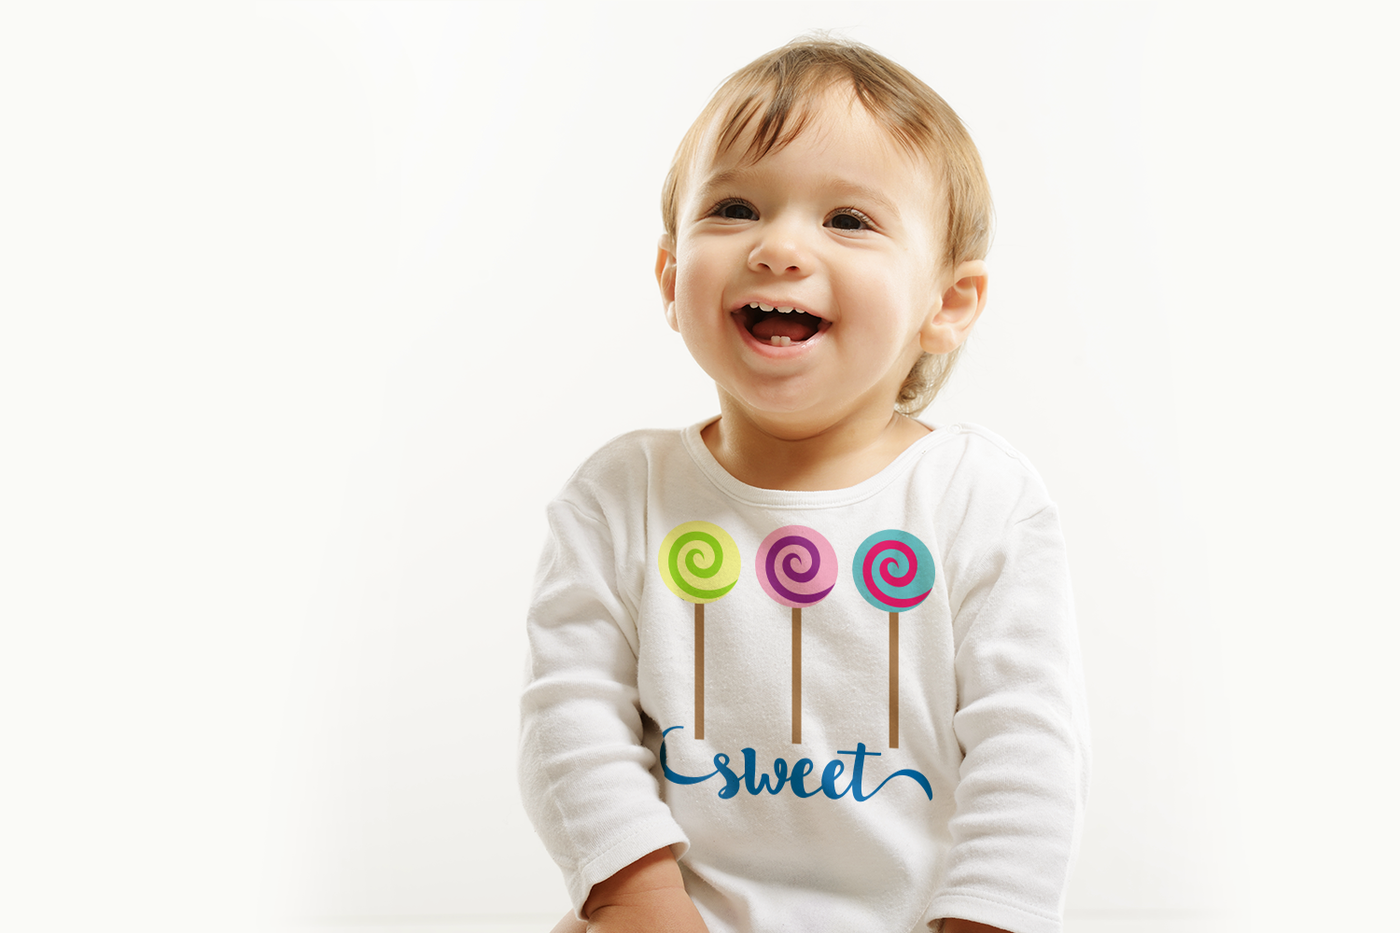 White baby wearing a shirt with three swirled lollipops that says "sweet" below